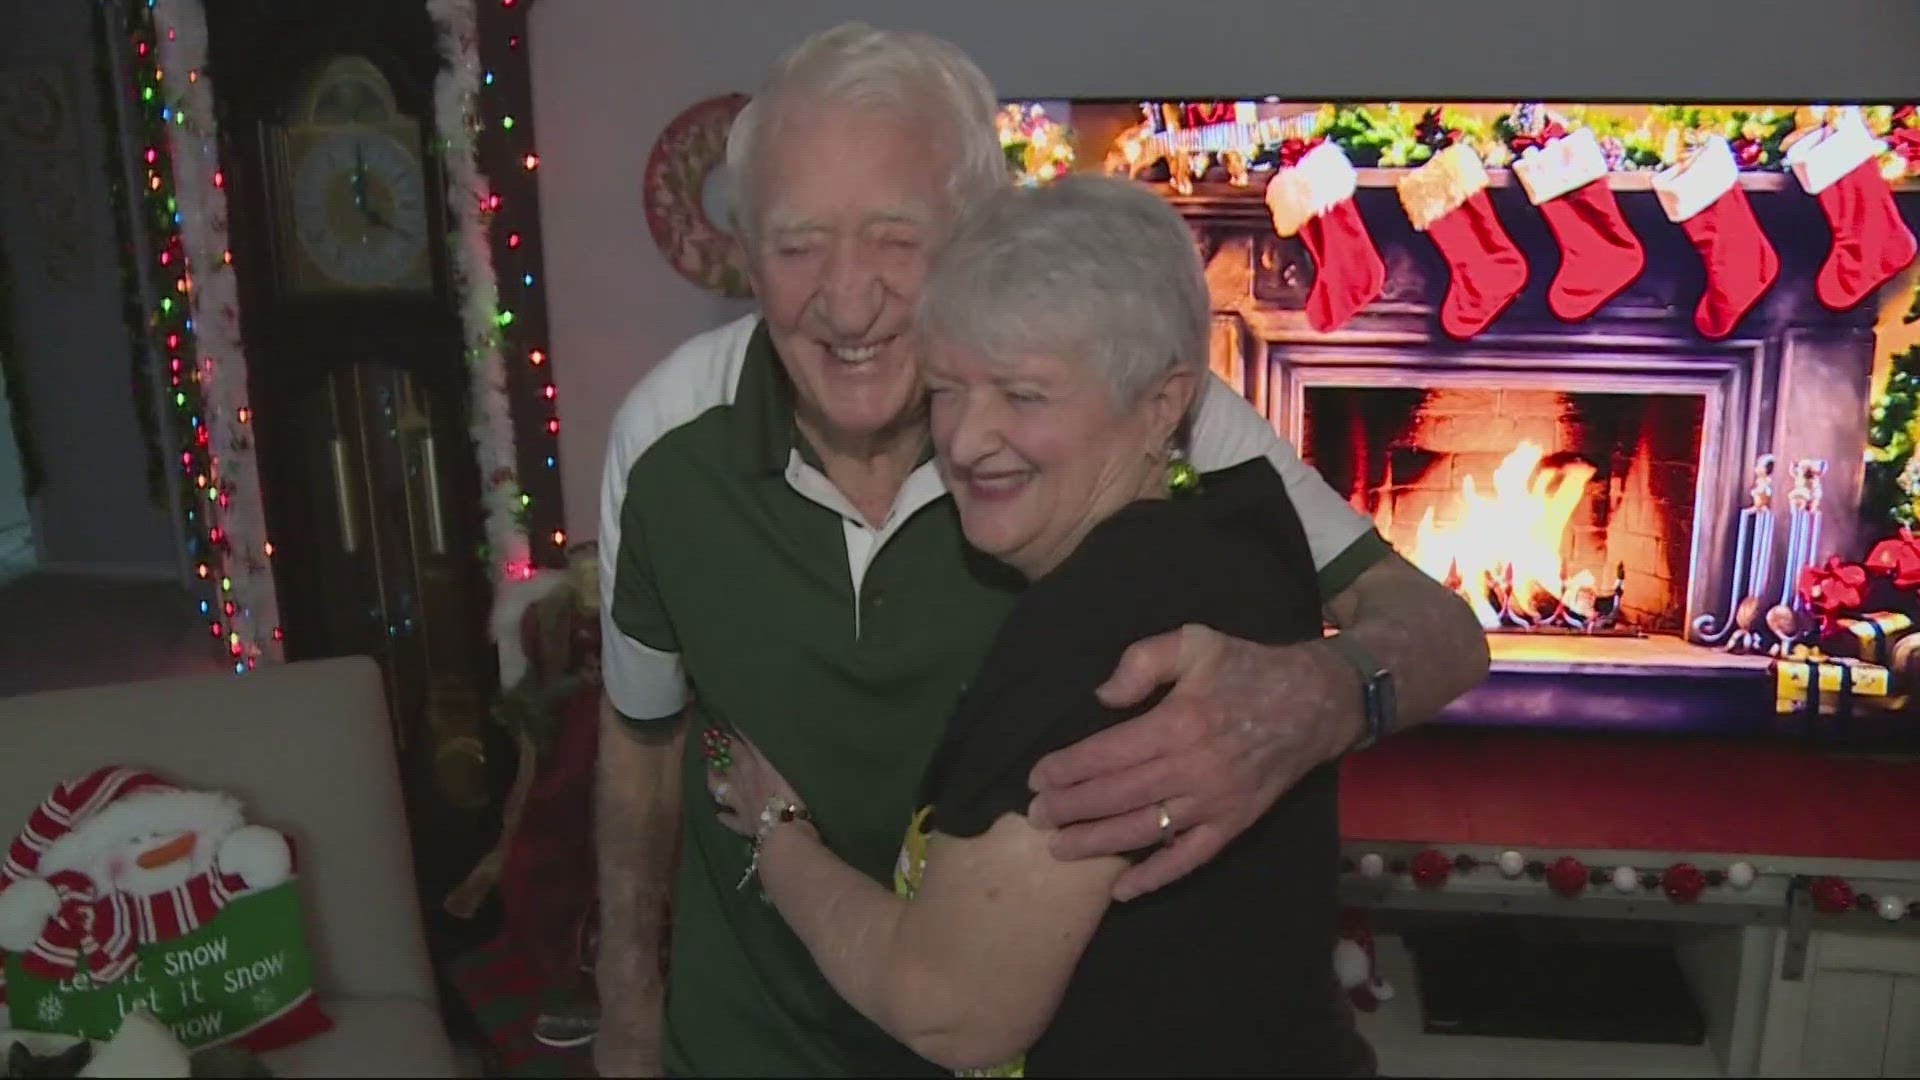 After 60 years of stringing up extravagantly lit holiday displays, Duane Hesketh says it's still worth the two months it takes him, and his wife agrees.